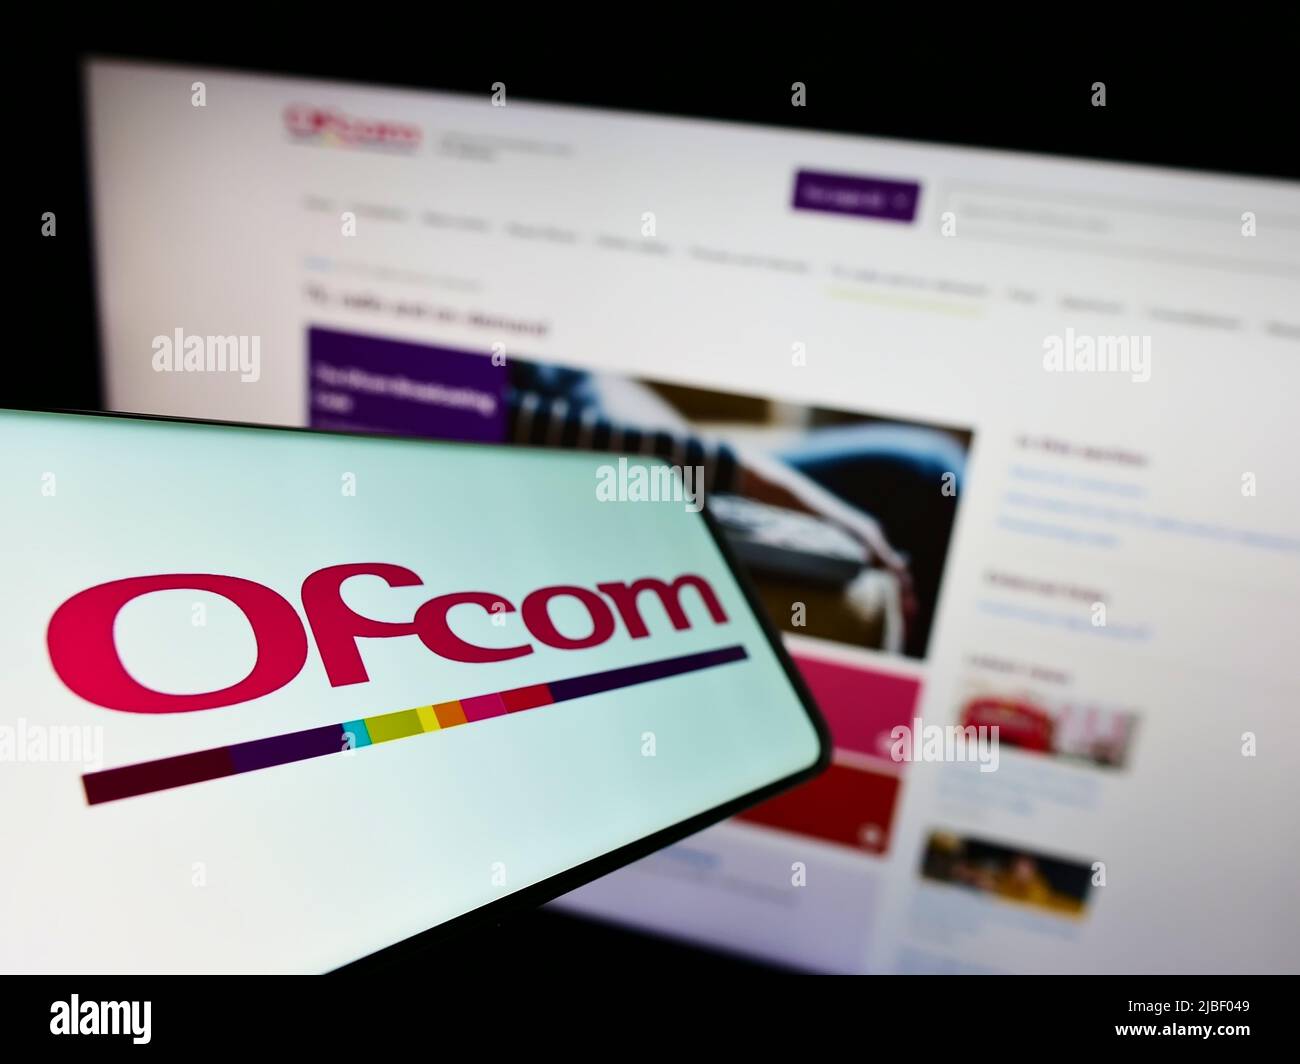 Smartphone with logo of British authority Office of Communications (Ofcom) on screen in front of website. Focus on center-left of phone display. Stock Photo